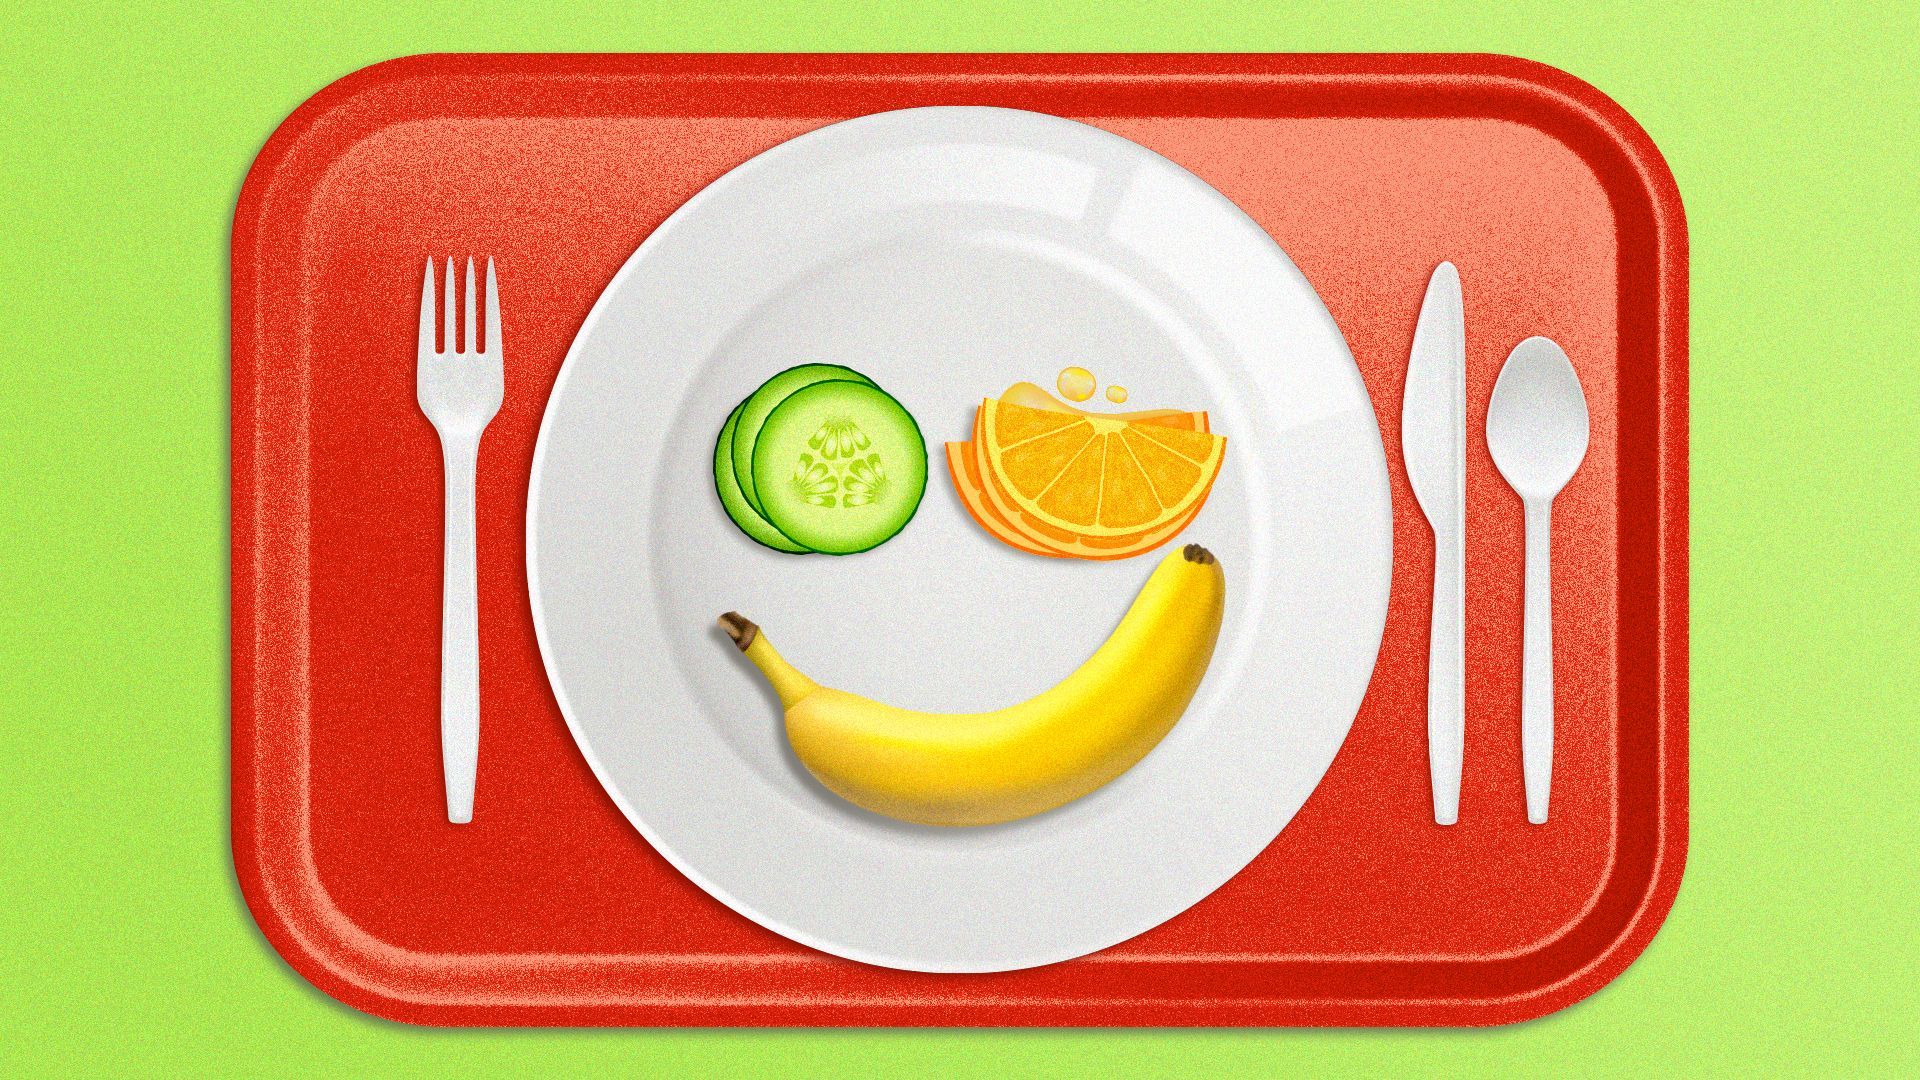 Illustration of a cafeteria lunch tray with a plate and silverware on it and on the plate there are fruits and vegetables making a smiley face.